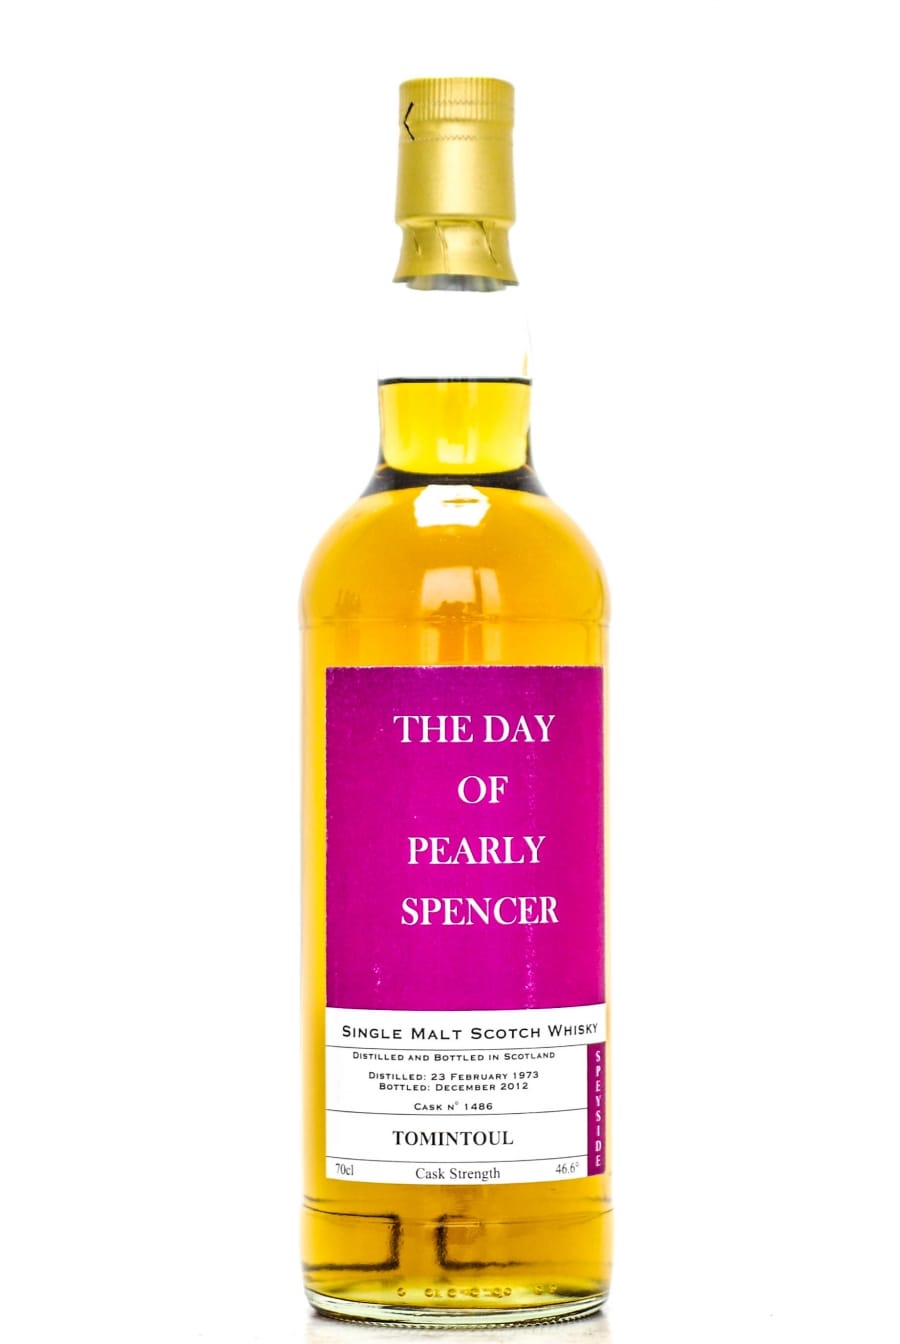 Tomintoul - Tomintoul 39 Years Old Taste Still  Bottlers: The Day of Pearly Spencer Cask:1486 46.6% 1973